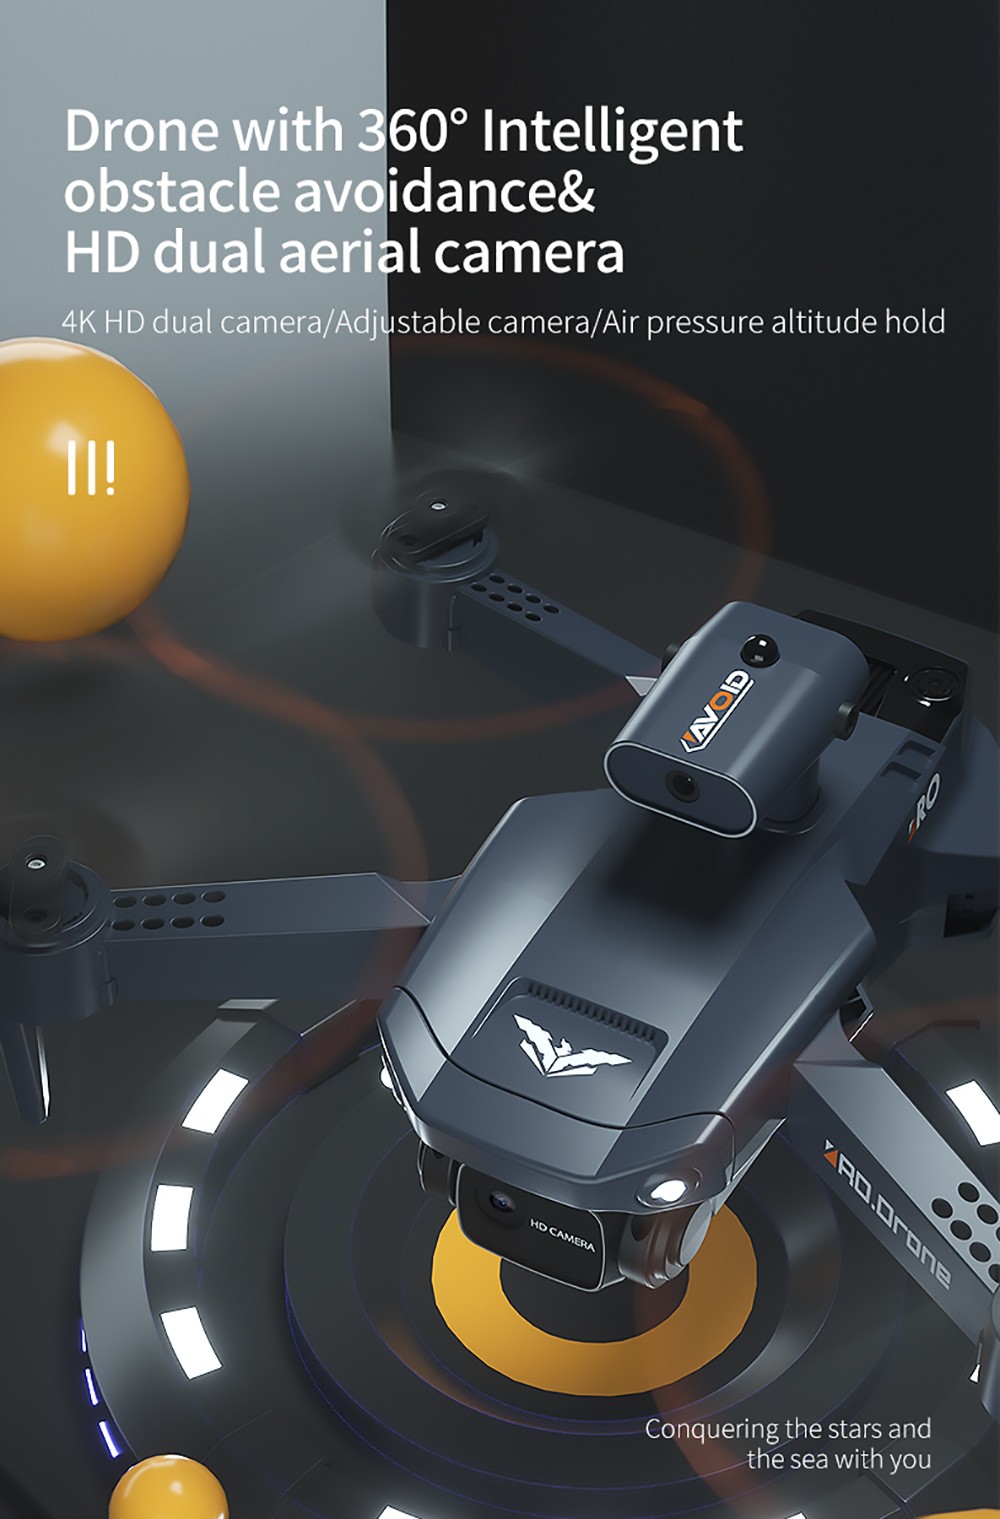 JJRC H106 Foldable RC Drone with All-Round Obstacle Avoidance Function Quadcopter with Two Cameras - Orange